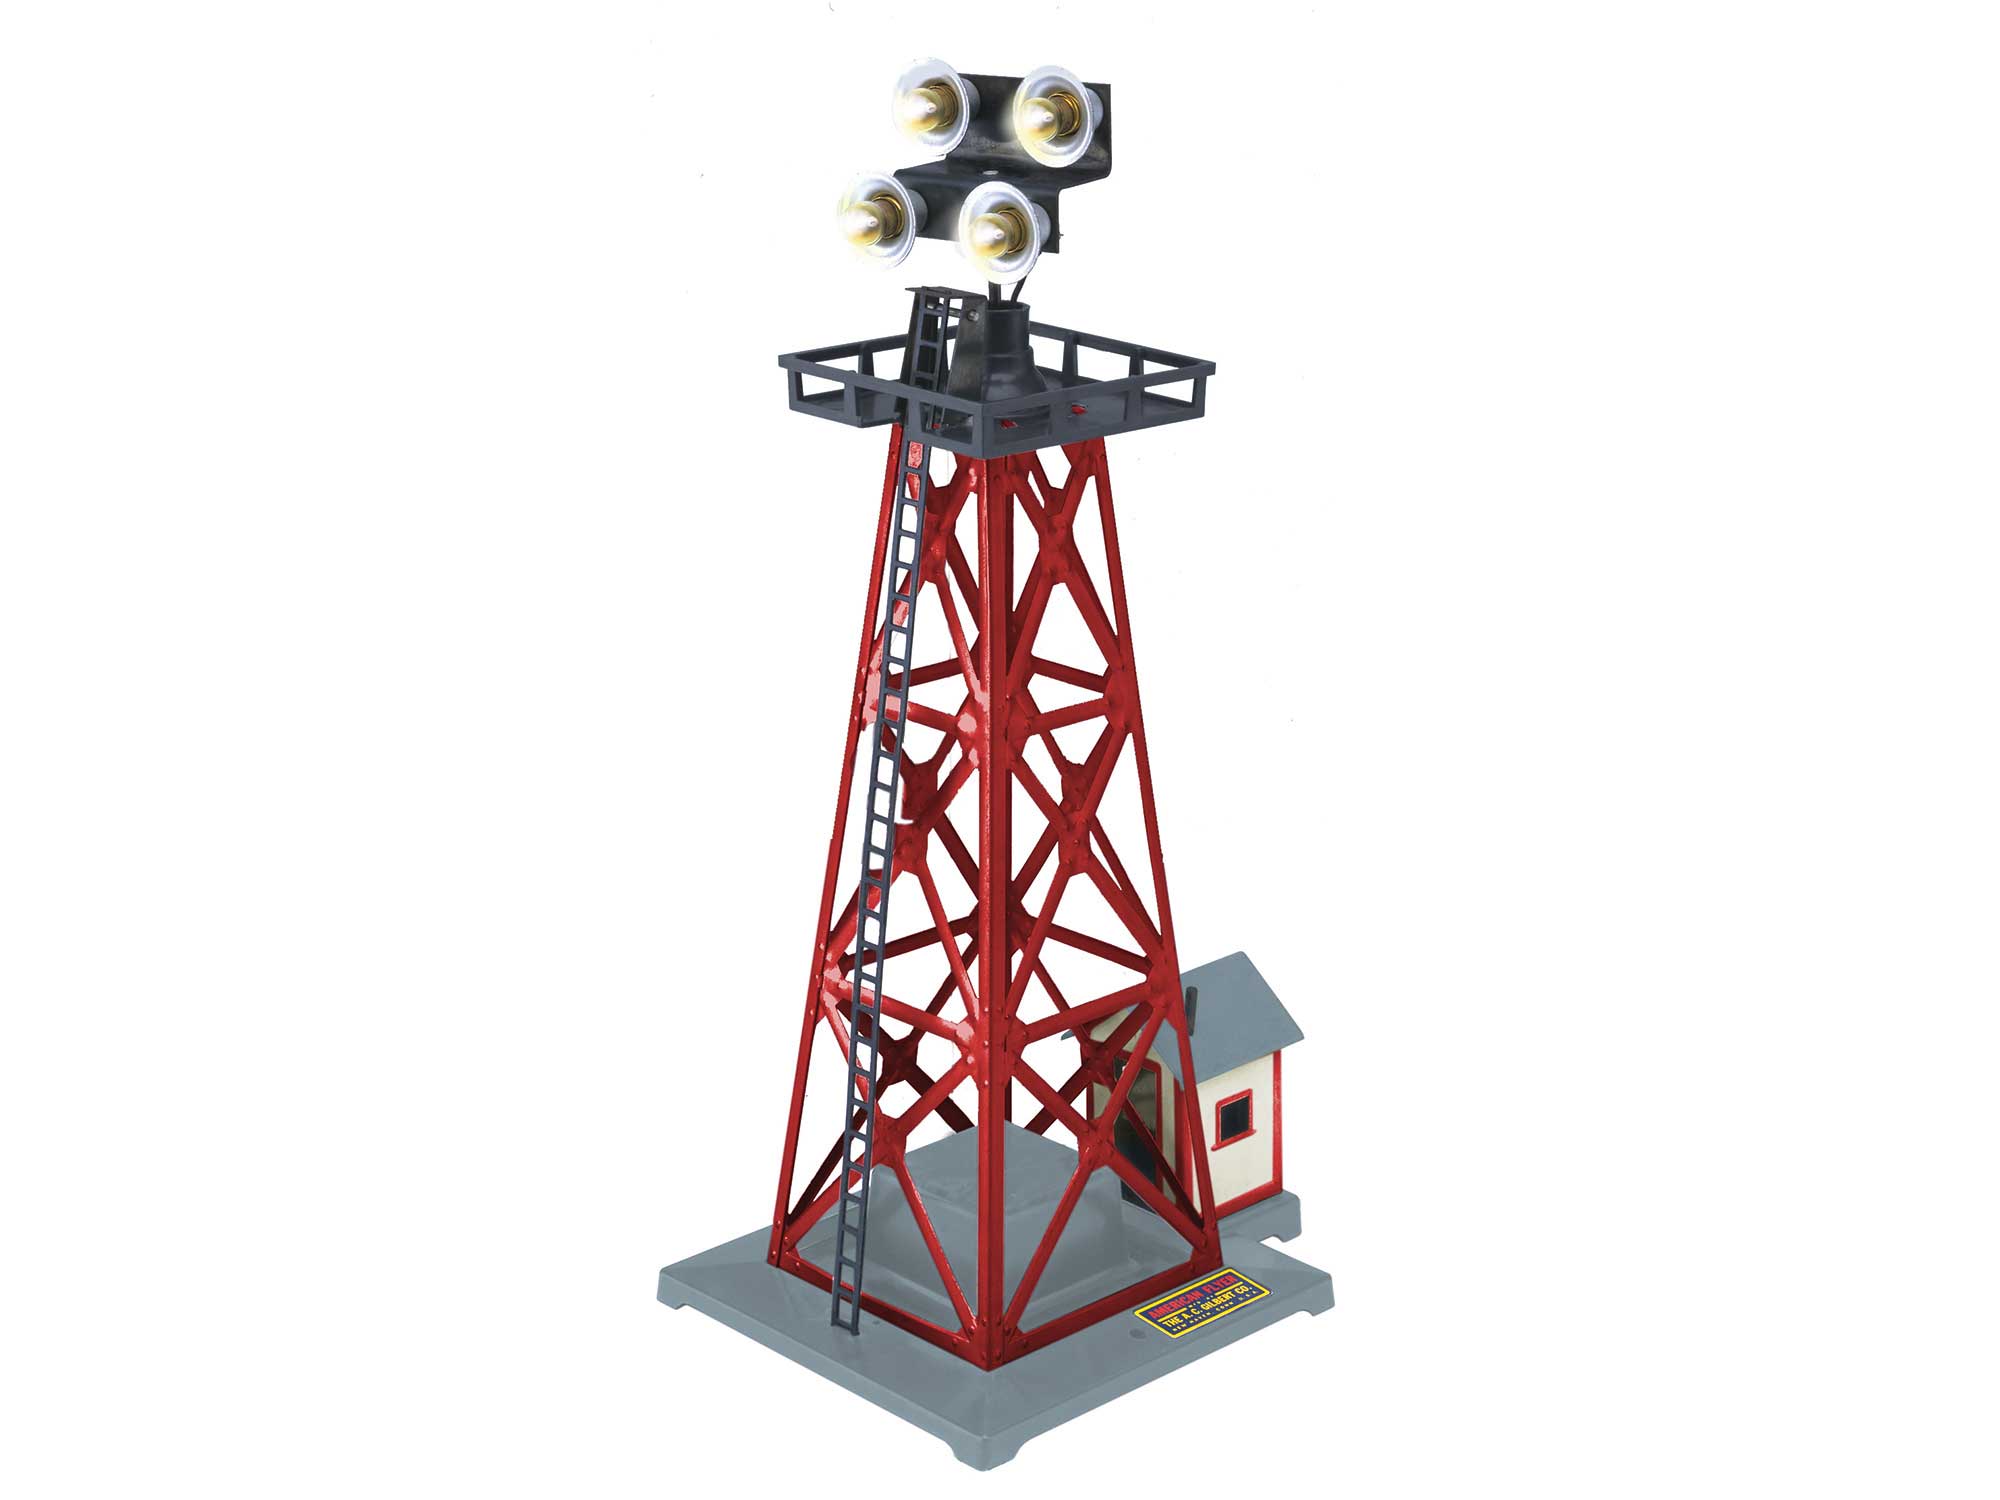 Lionel 6-49847 American Flyer 774 Floodlight Tower MIB Nr for sale online 